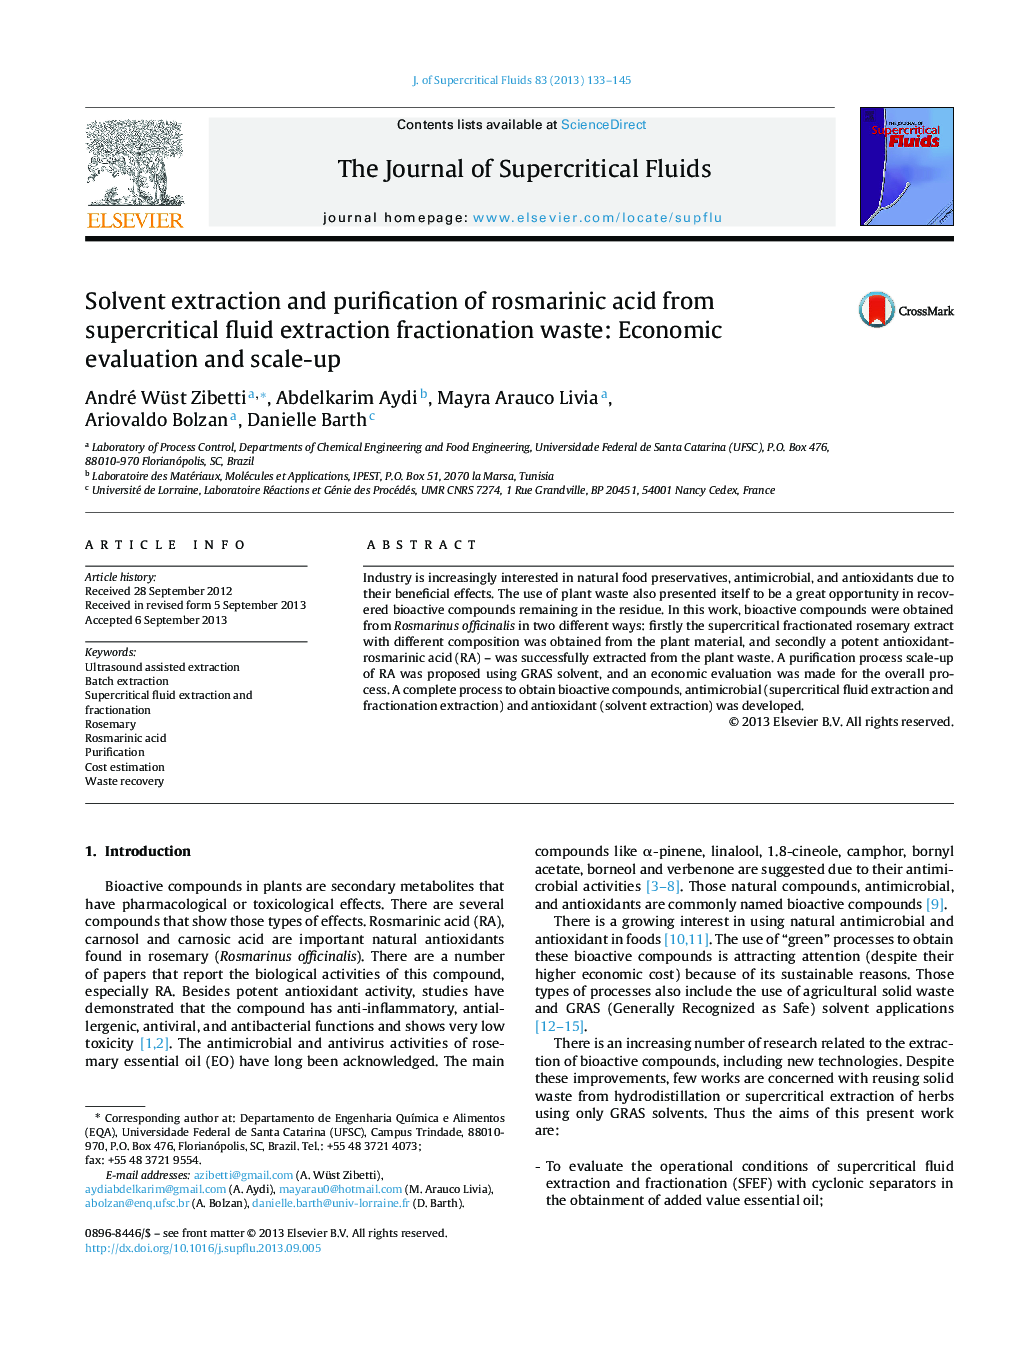 Solvent extraction and purification of rosmarinic acid from supercritical fluid extraction fractionation waste: Economic evaluation and scale-up